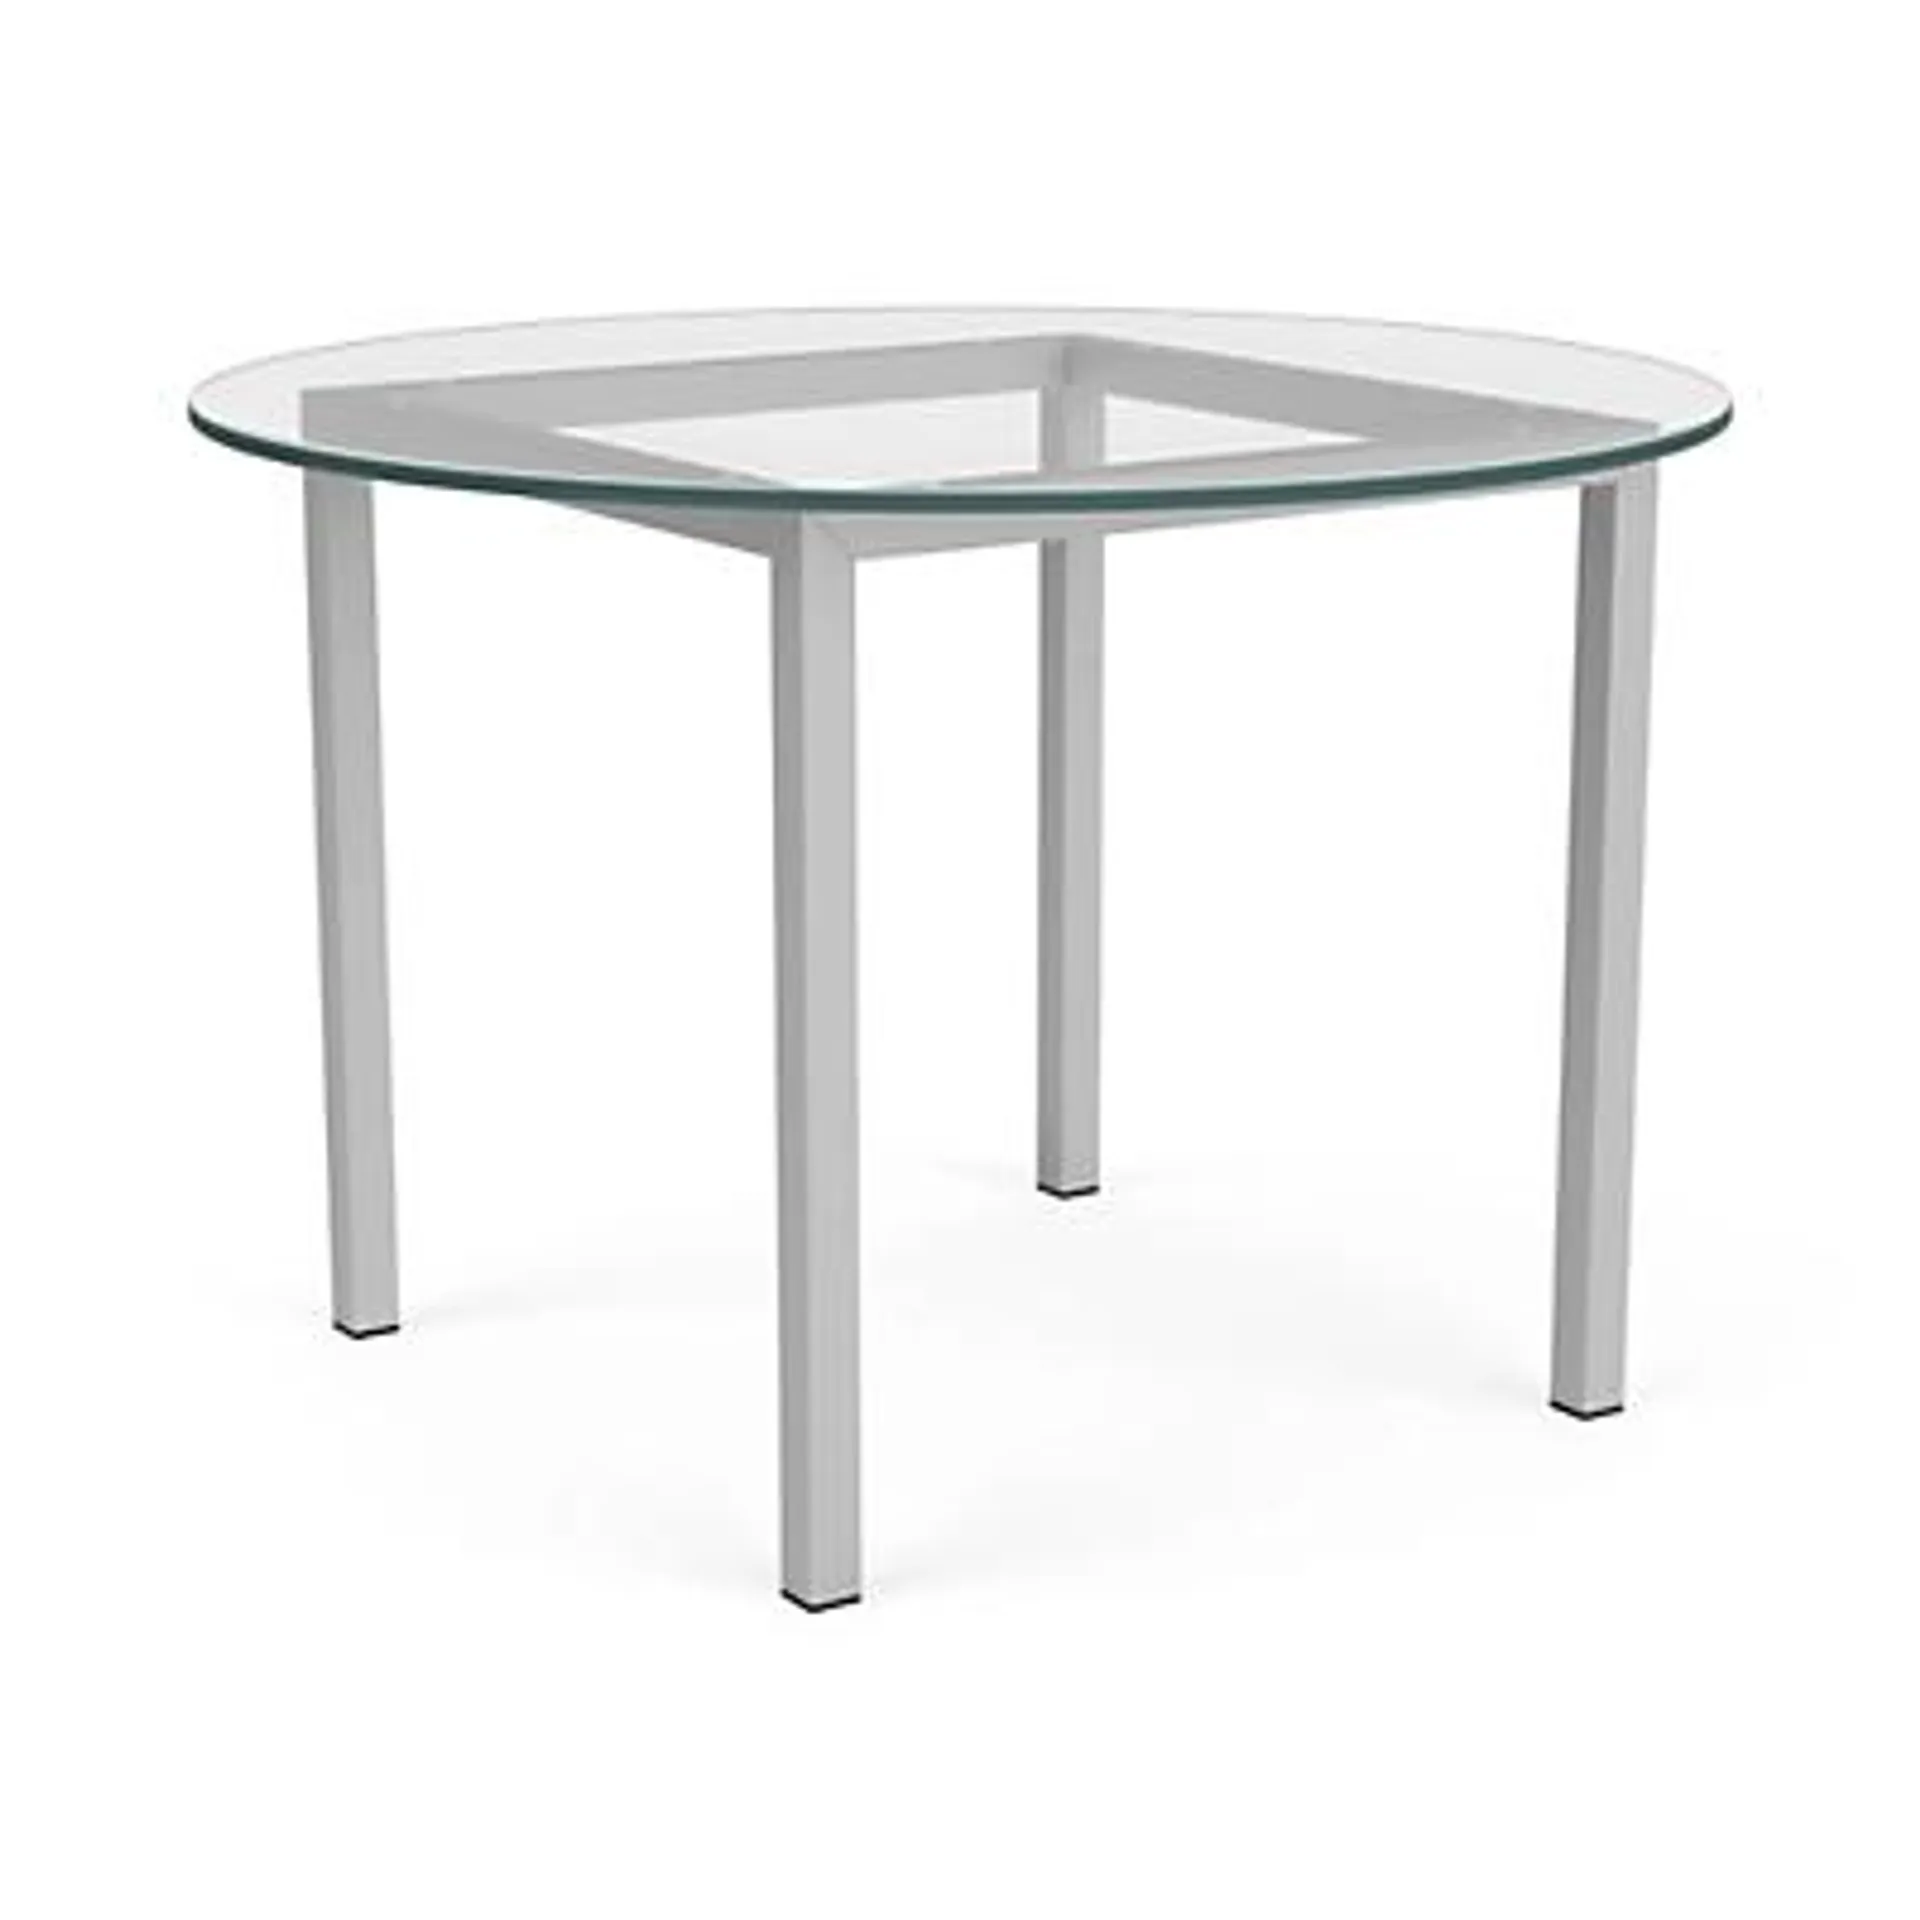 Parsons 42 diam 1.5" Outdoor Table in Stainless Steel with Clear Glass Top